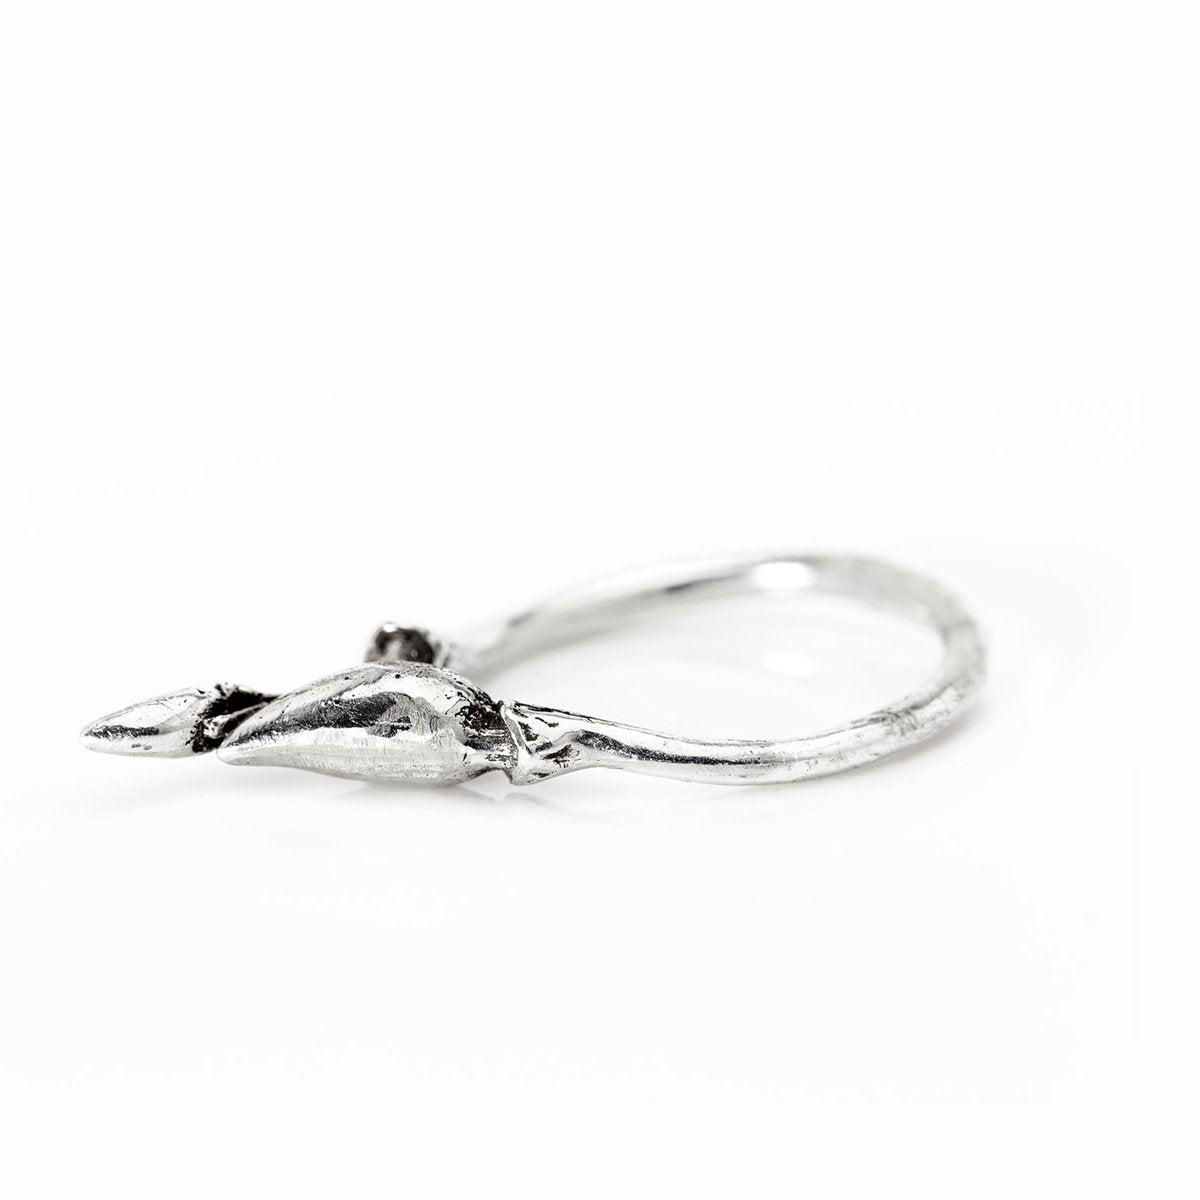 The videkisse ring - Silver